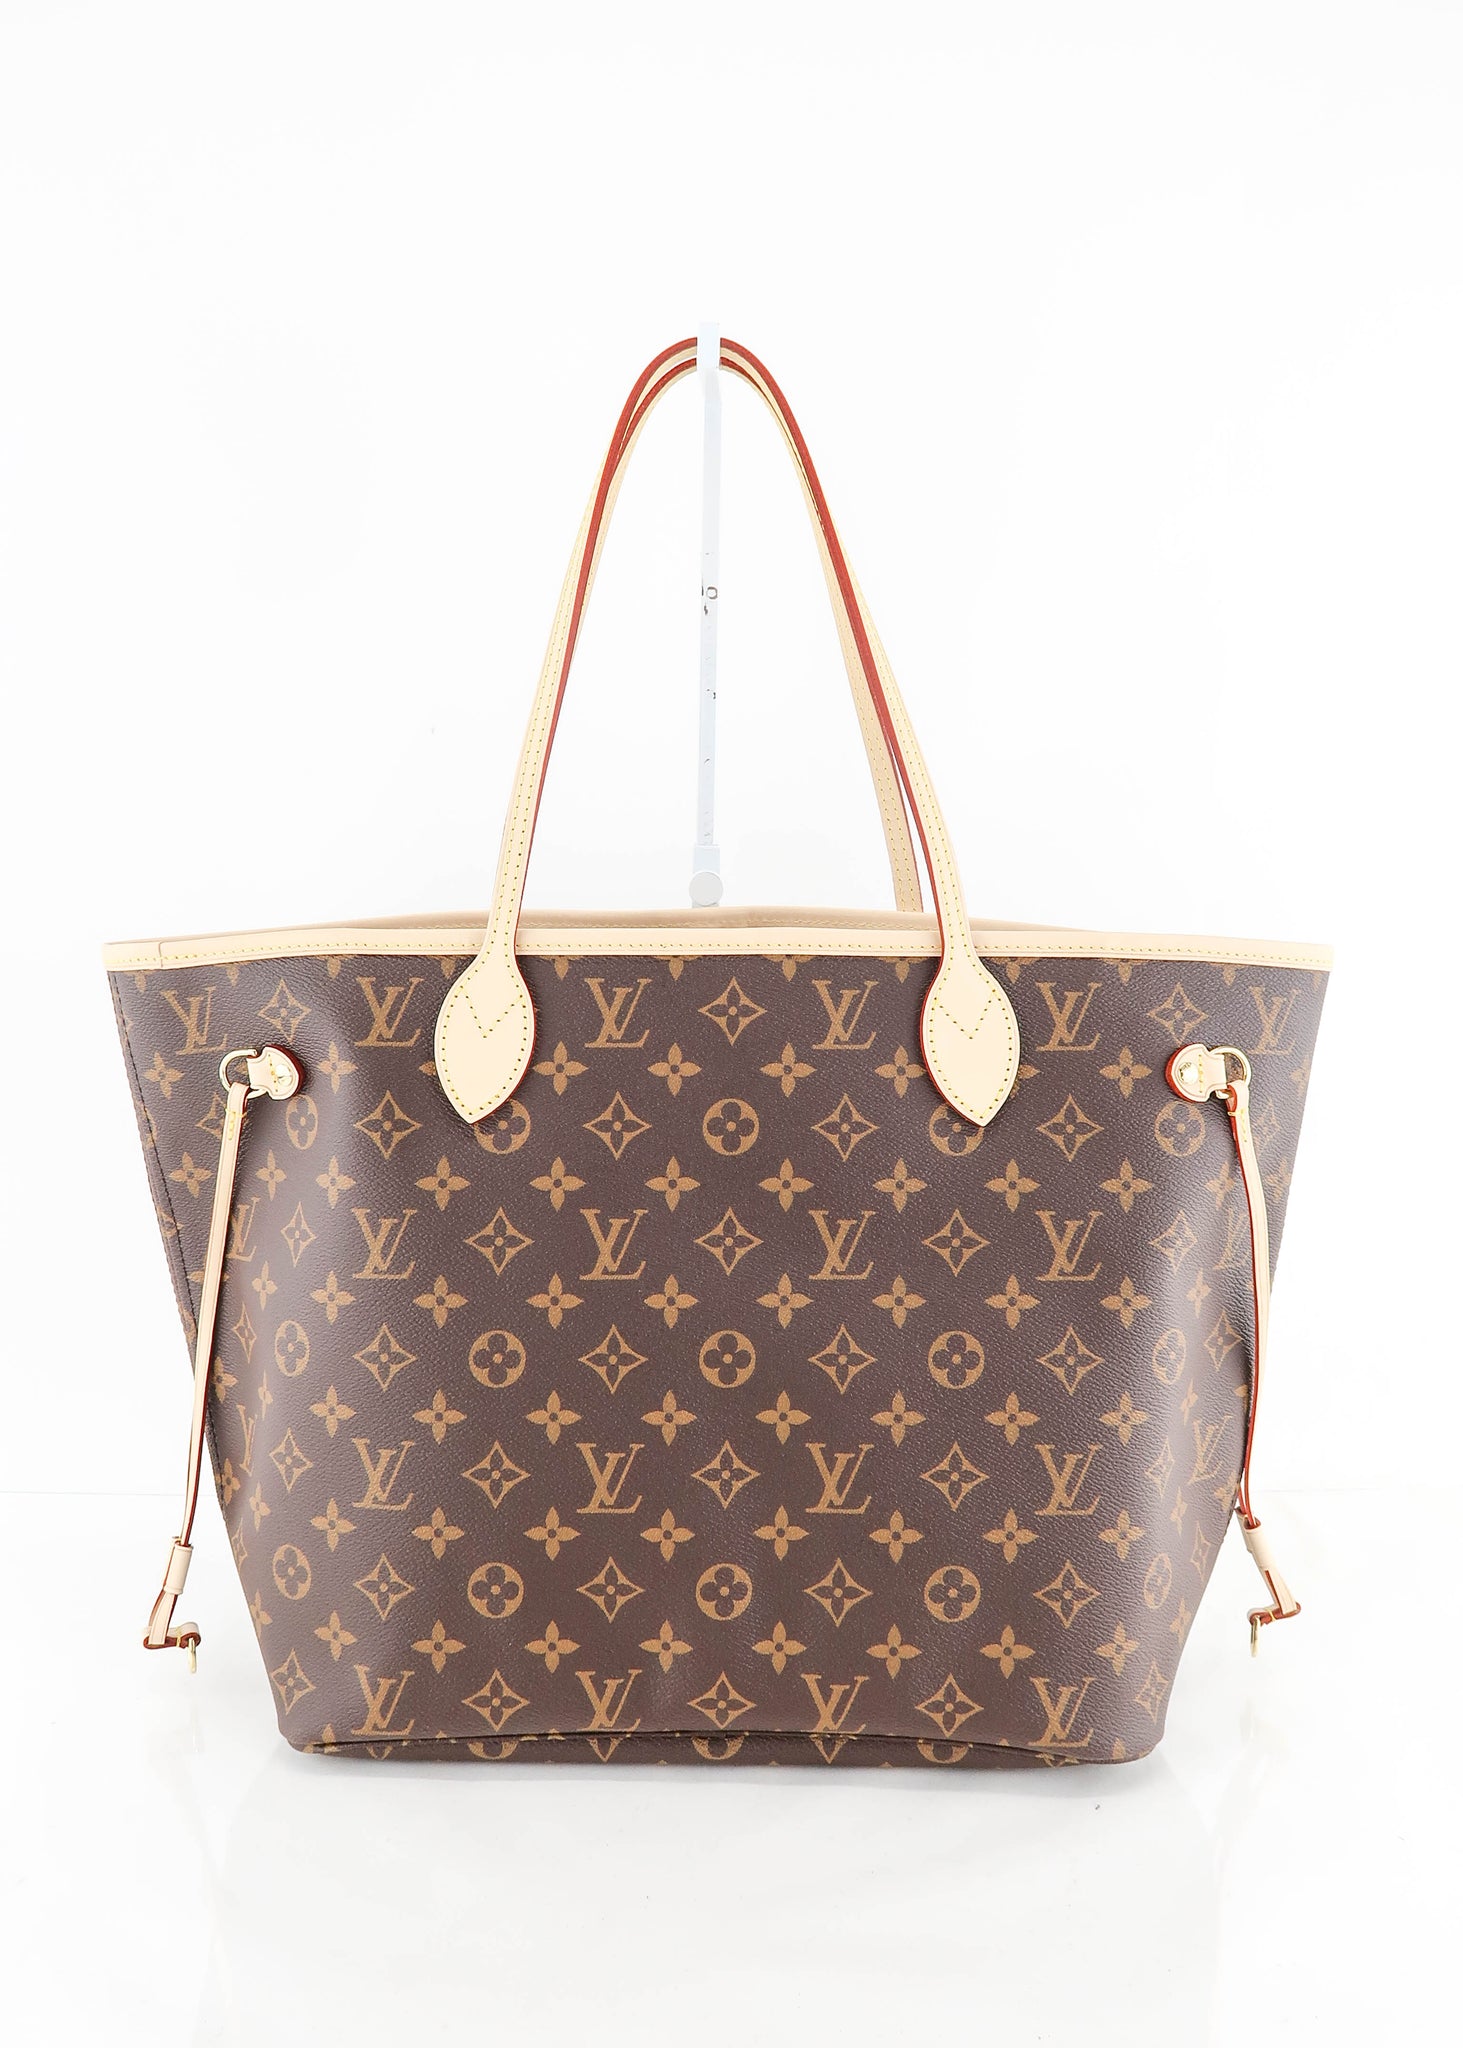 I love my neverfull, I wish it were monogrammed though. So chic